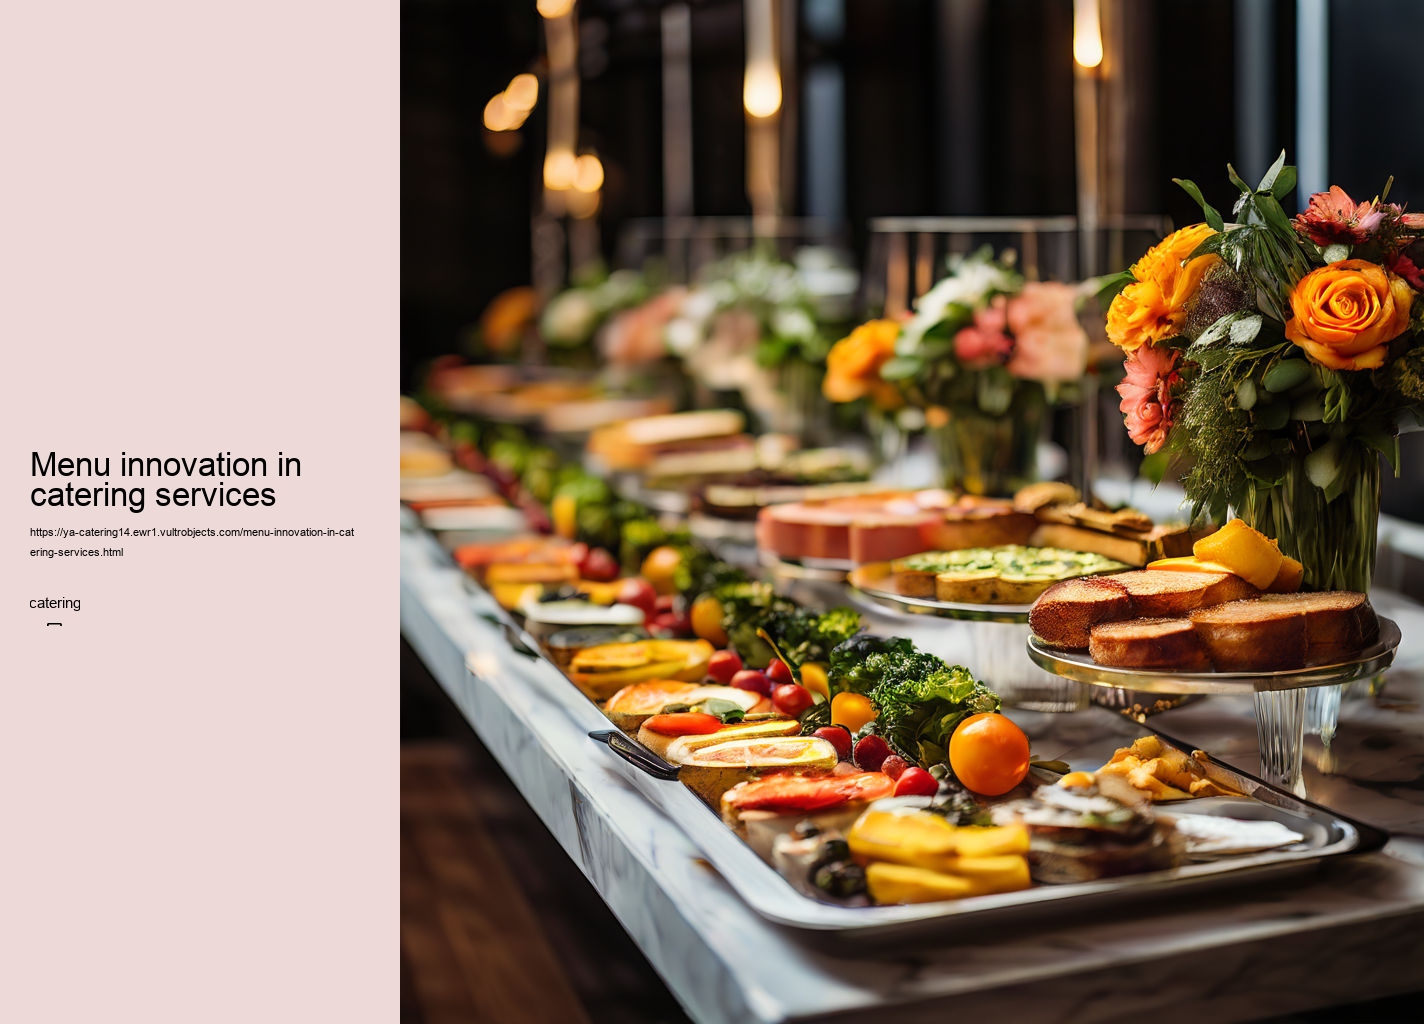 Menu innovation in catering services